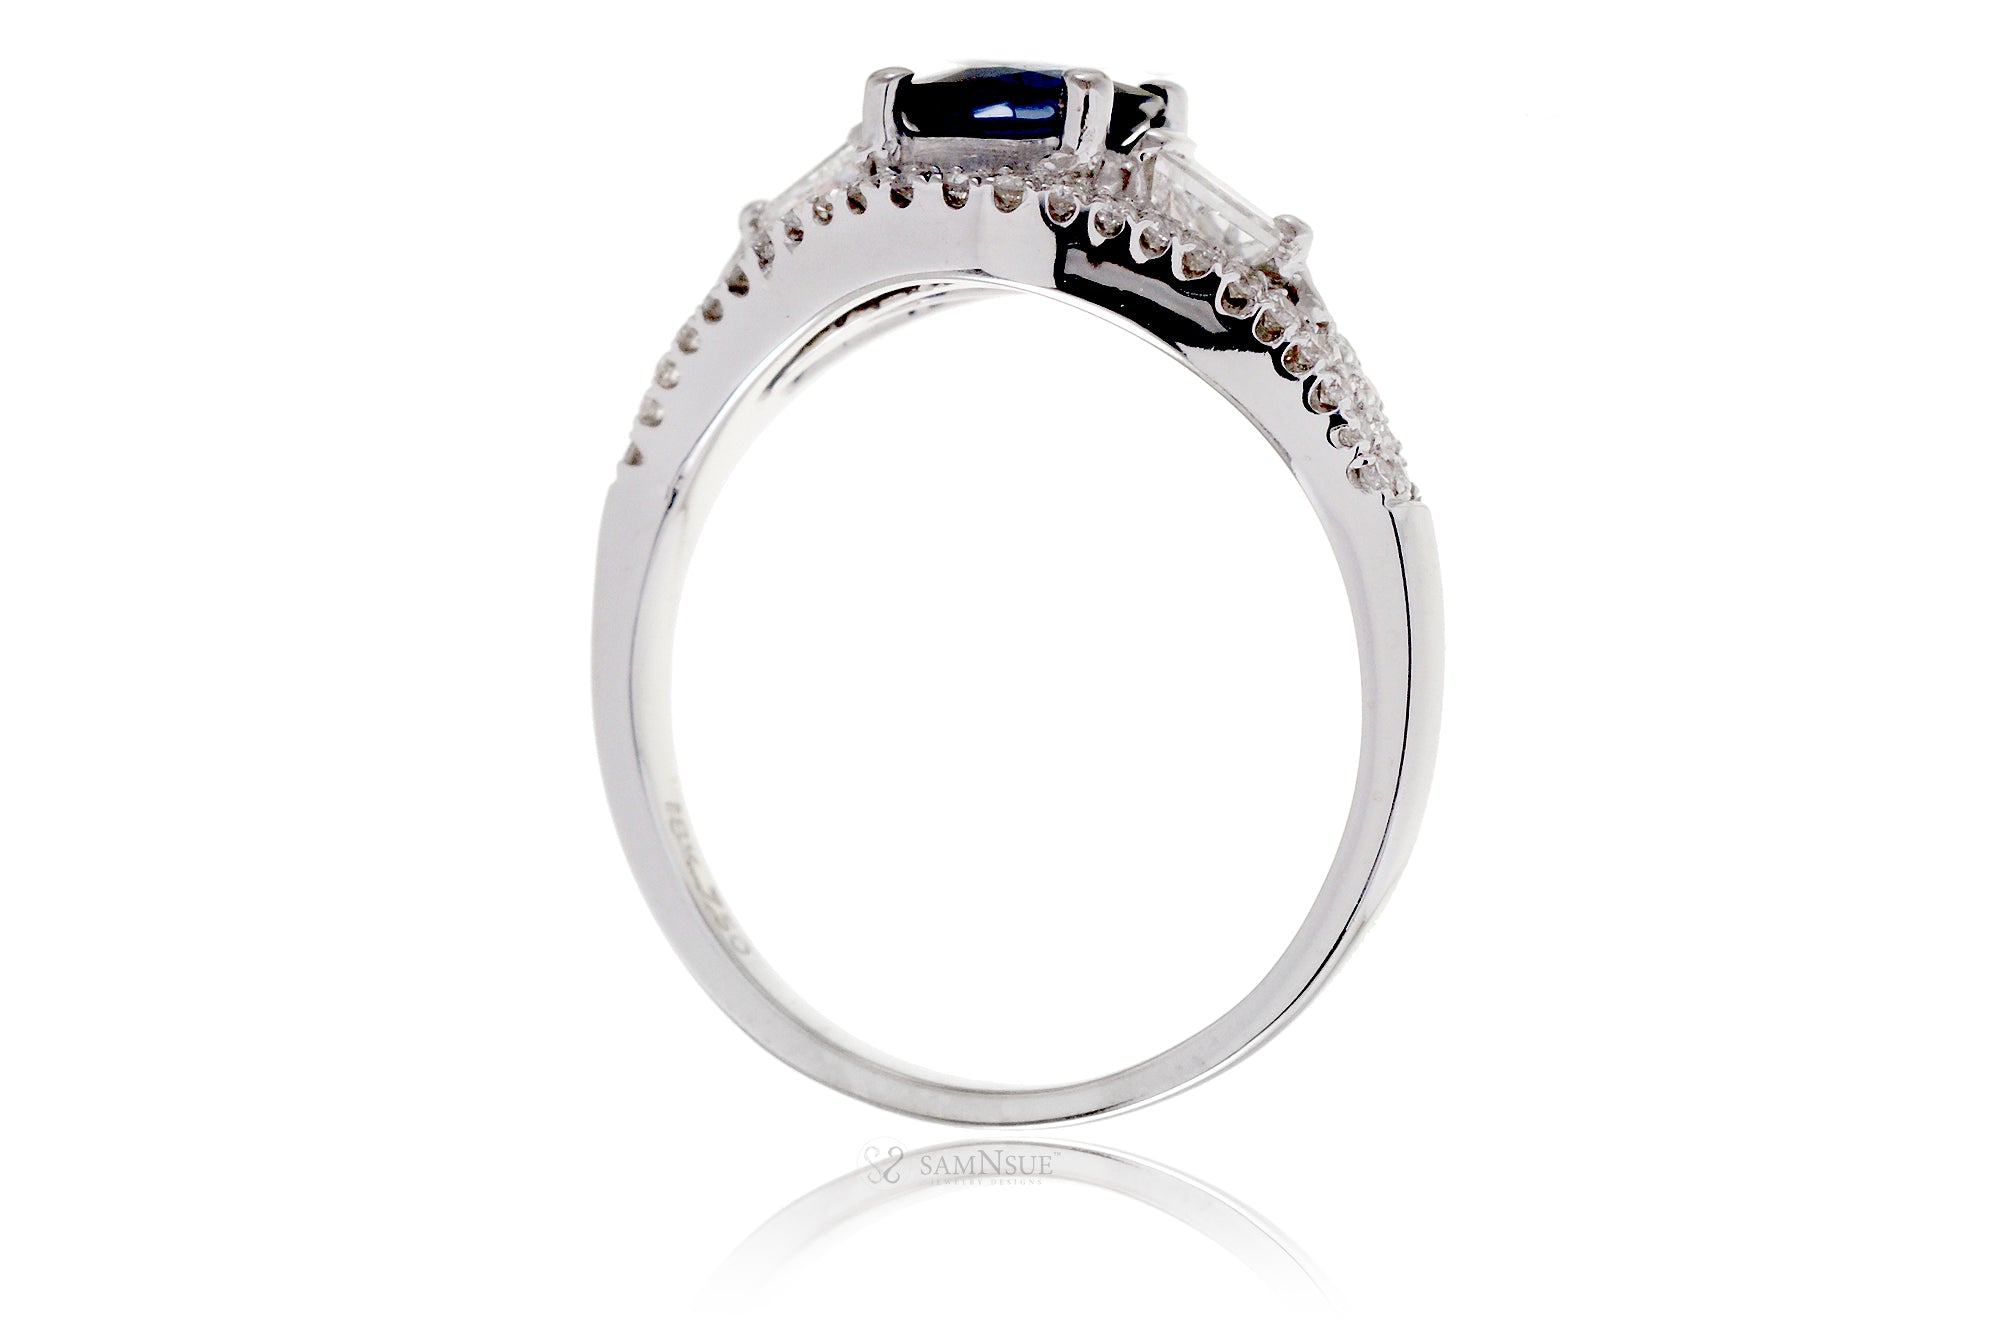 The Doheny Round Sapphire Ring